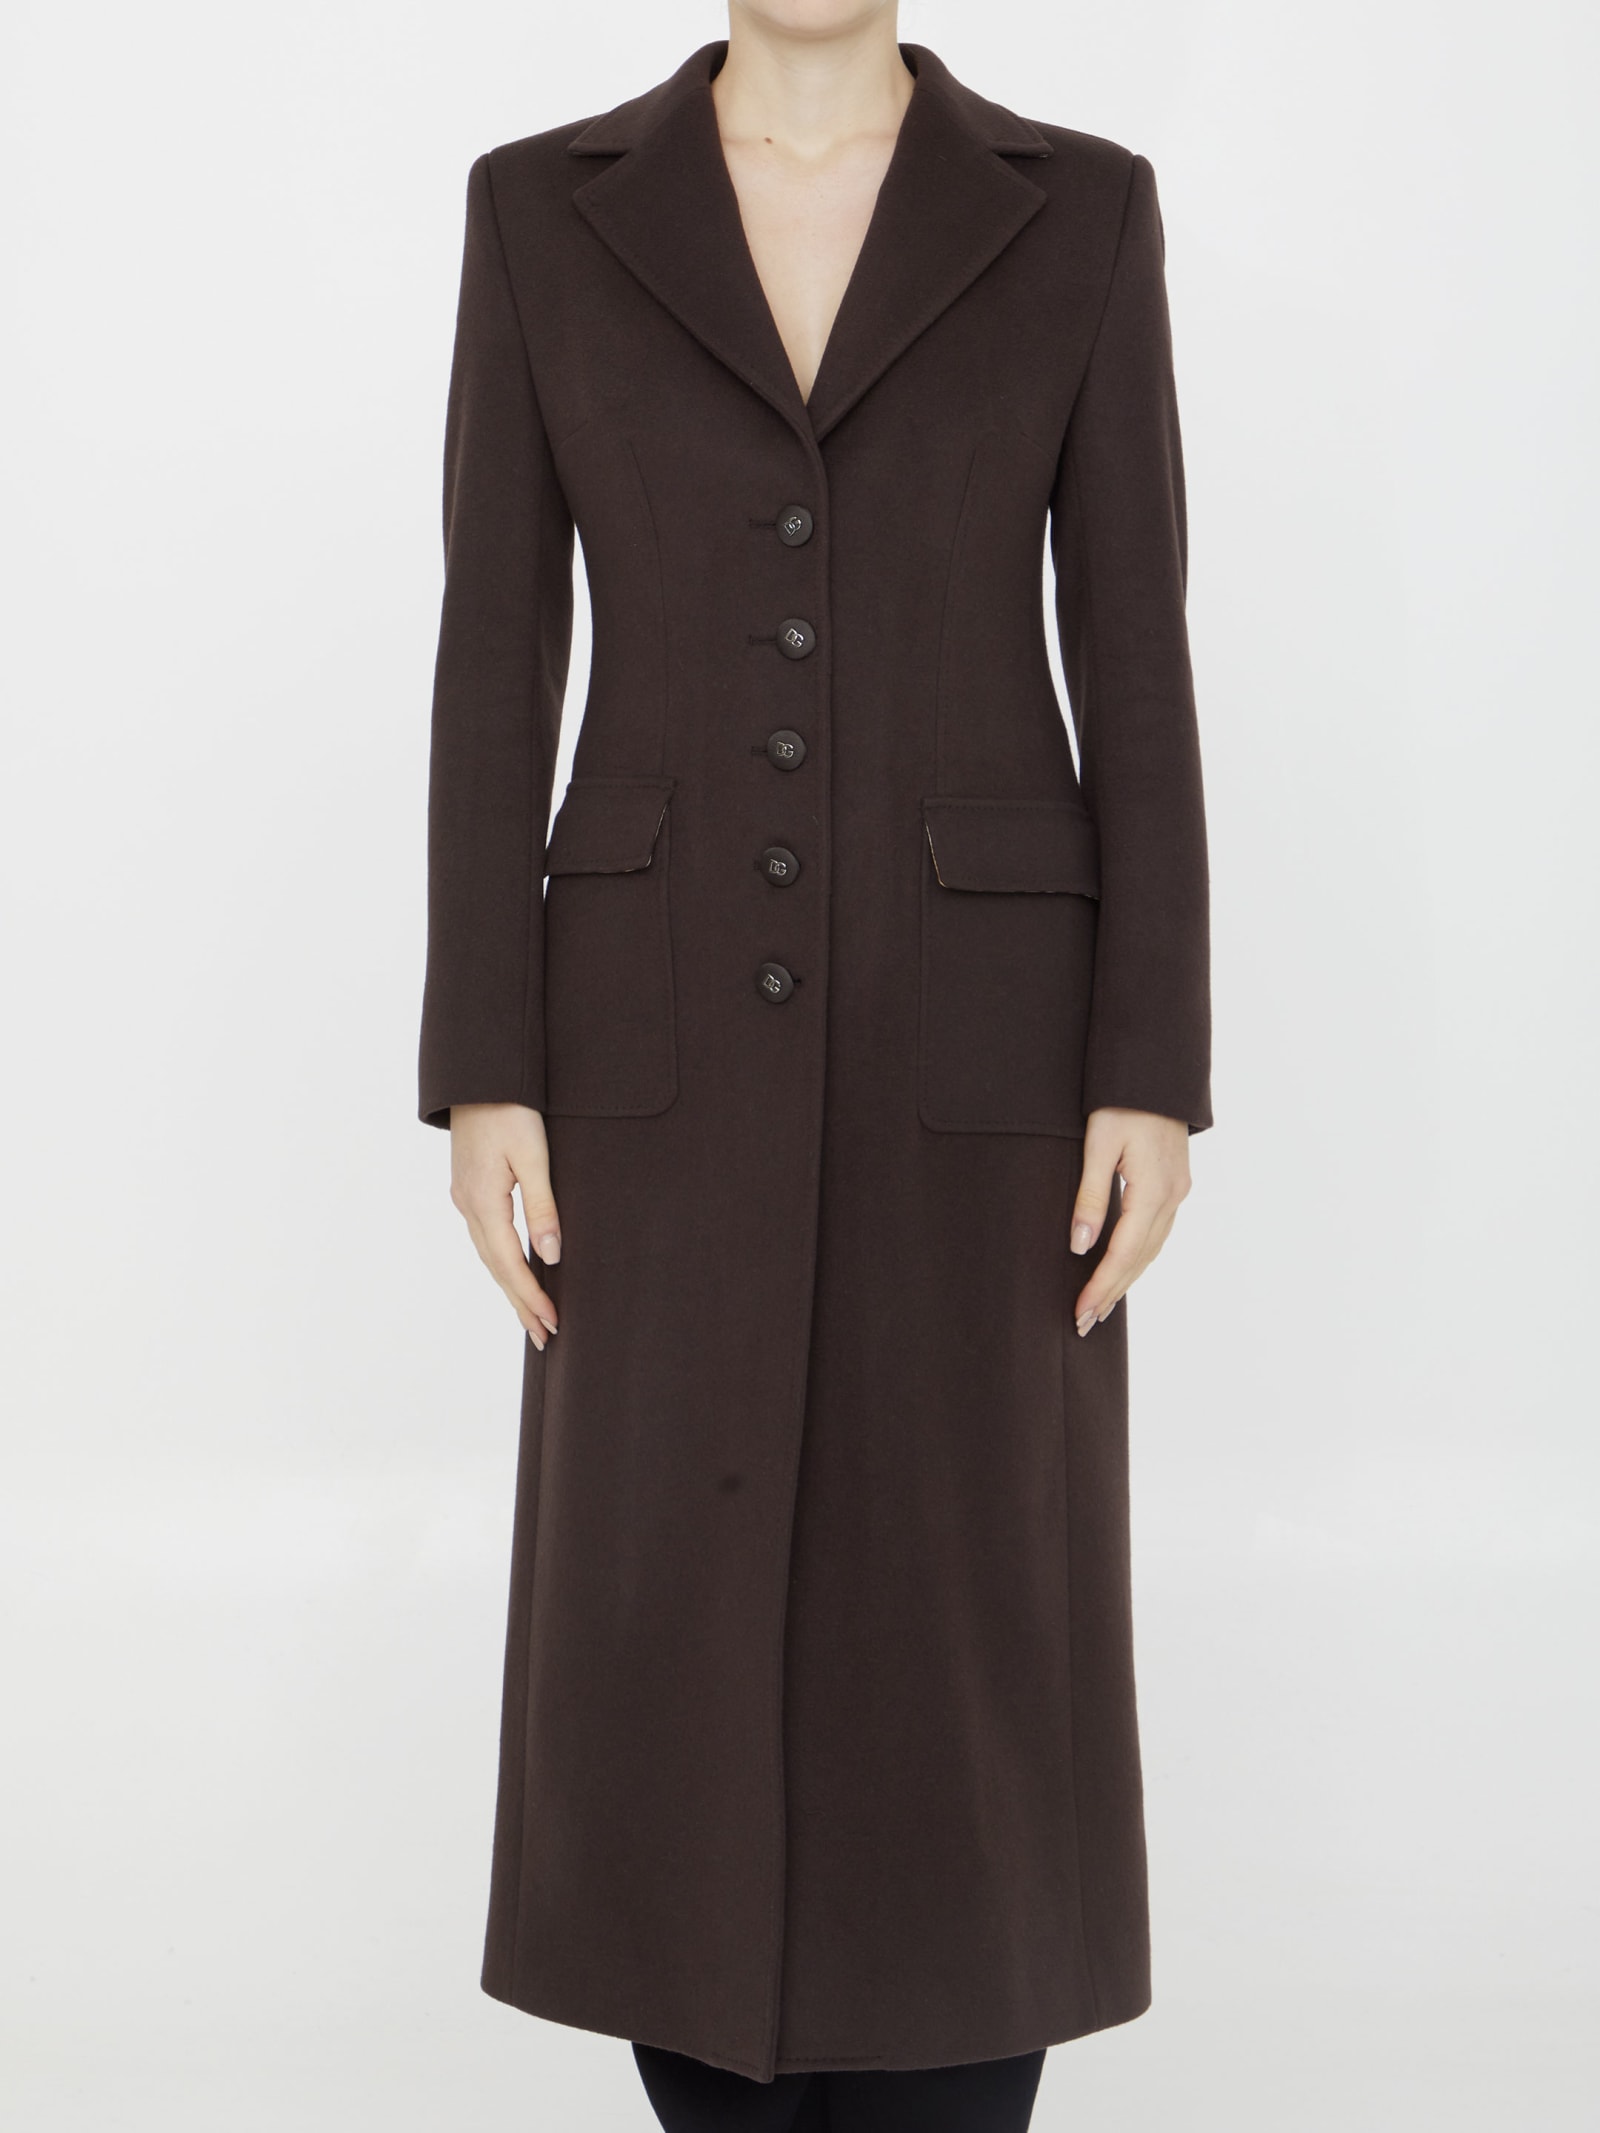 DOLCE & GABBANA LONG COAT IN WOOL AND CASHMERE